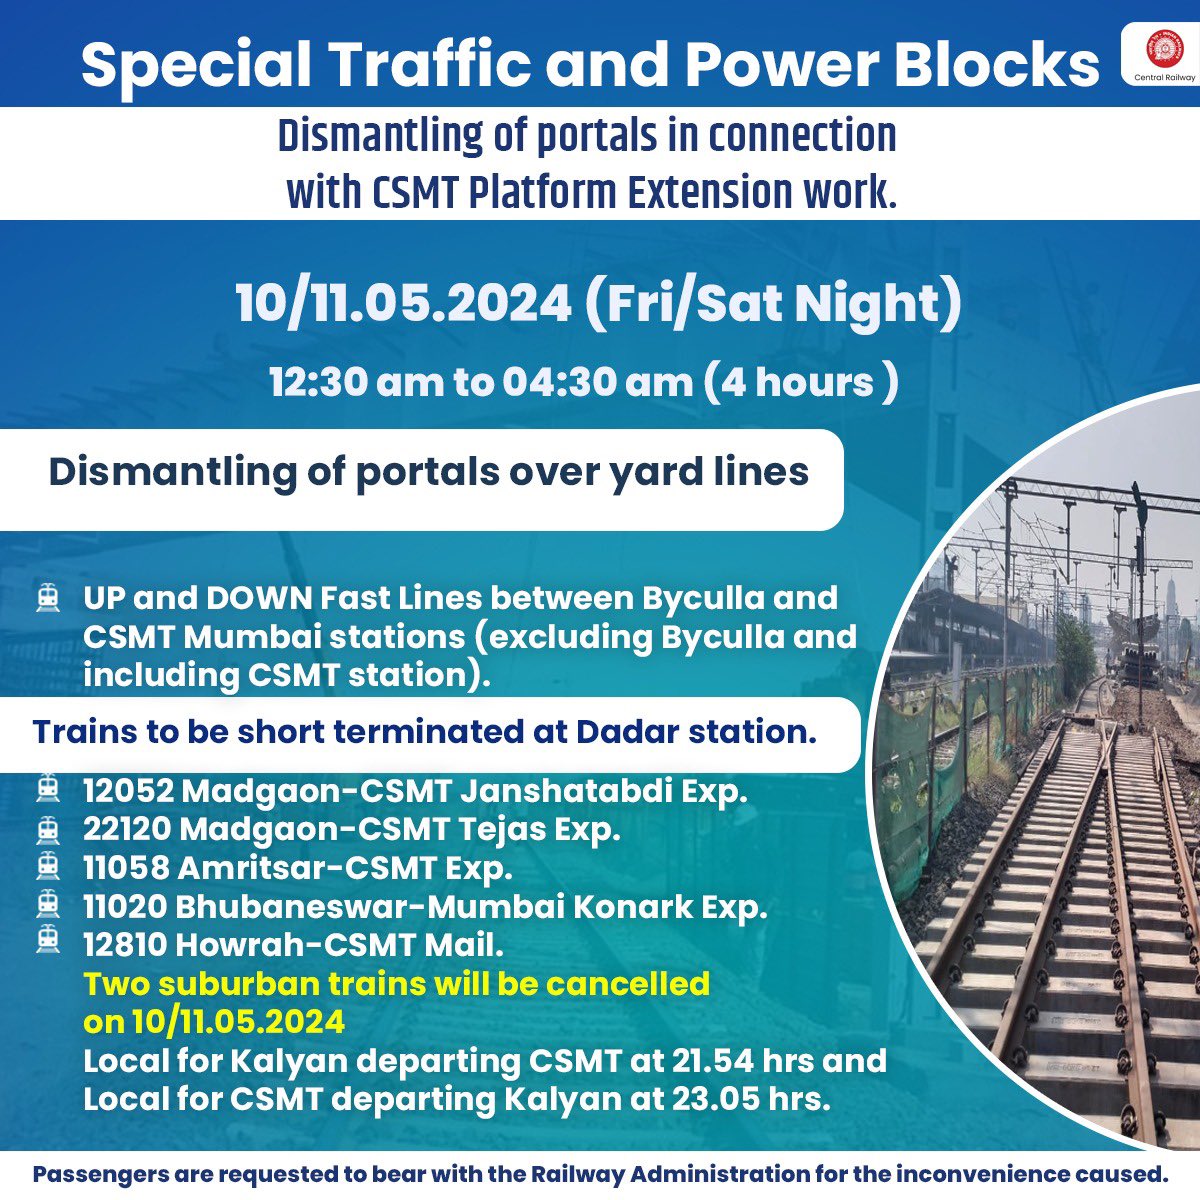 Traffic and Power Blocks for Dismantling of portals on 10/11.05.2024 (Friday/Saturday Night) The inconvenience caused is highly regretted, and passengers are requested to bear with the Railways. #CentralRailway #Powerblock #Trafficblock